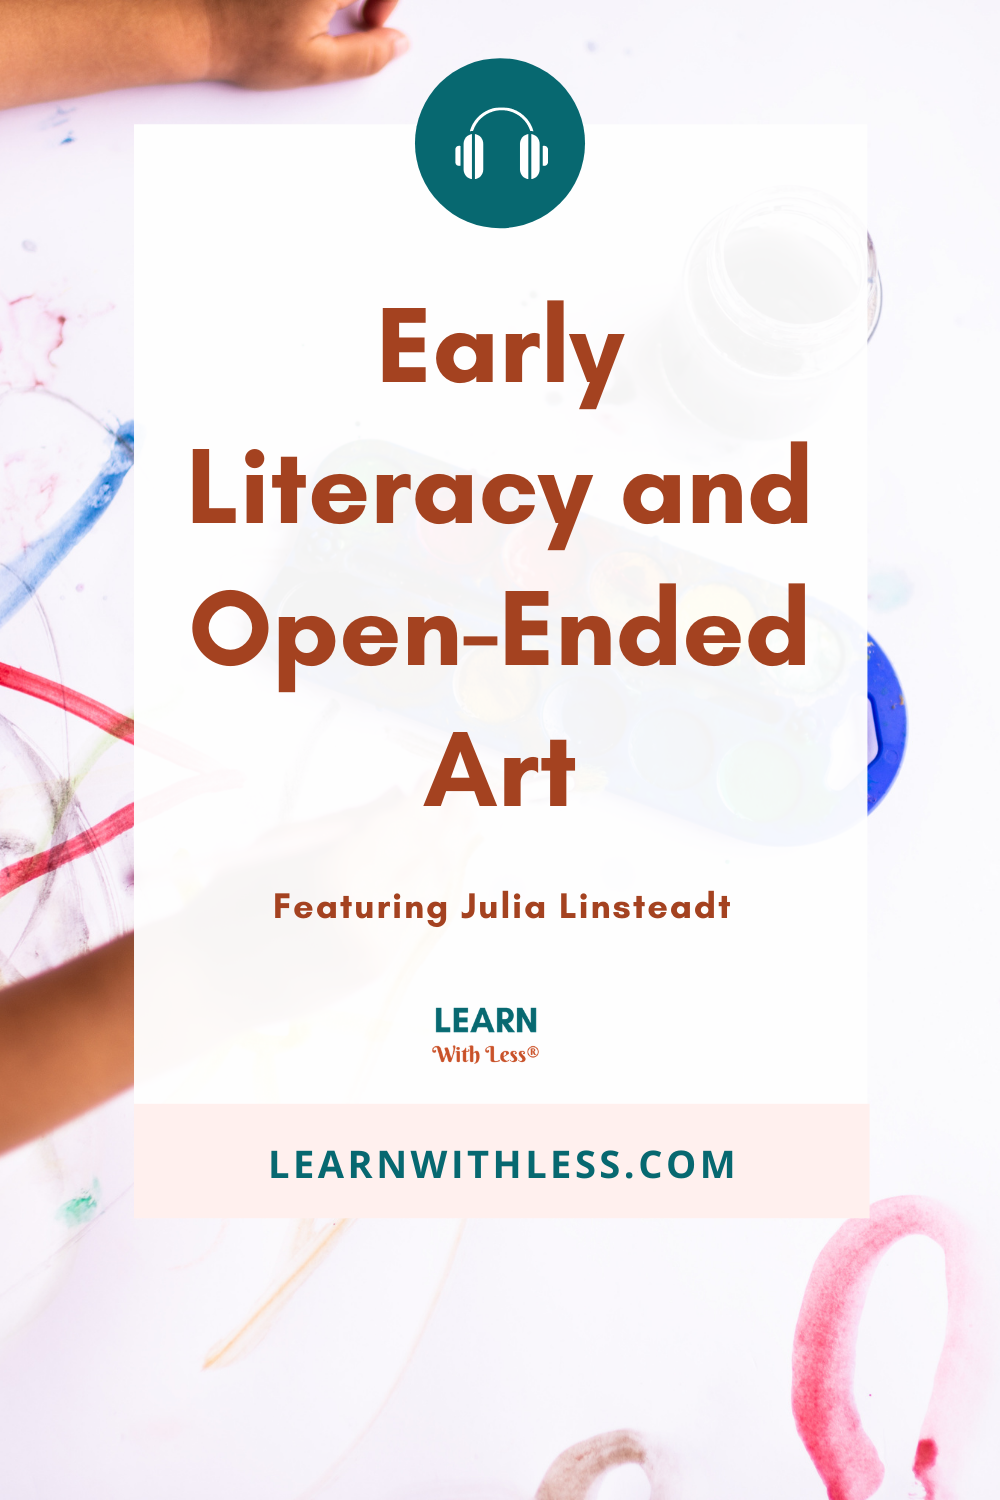 Pairing Process Art and Early Literacy Experiences